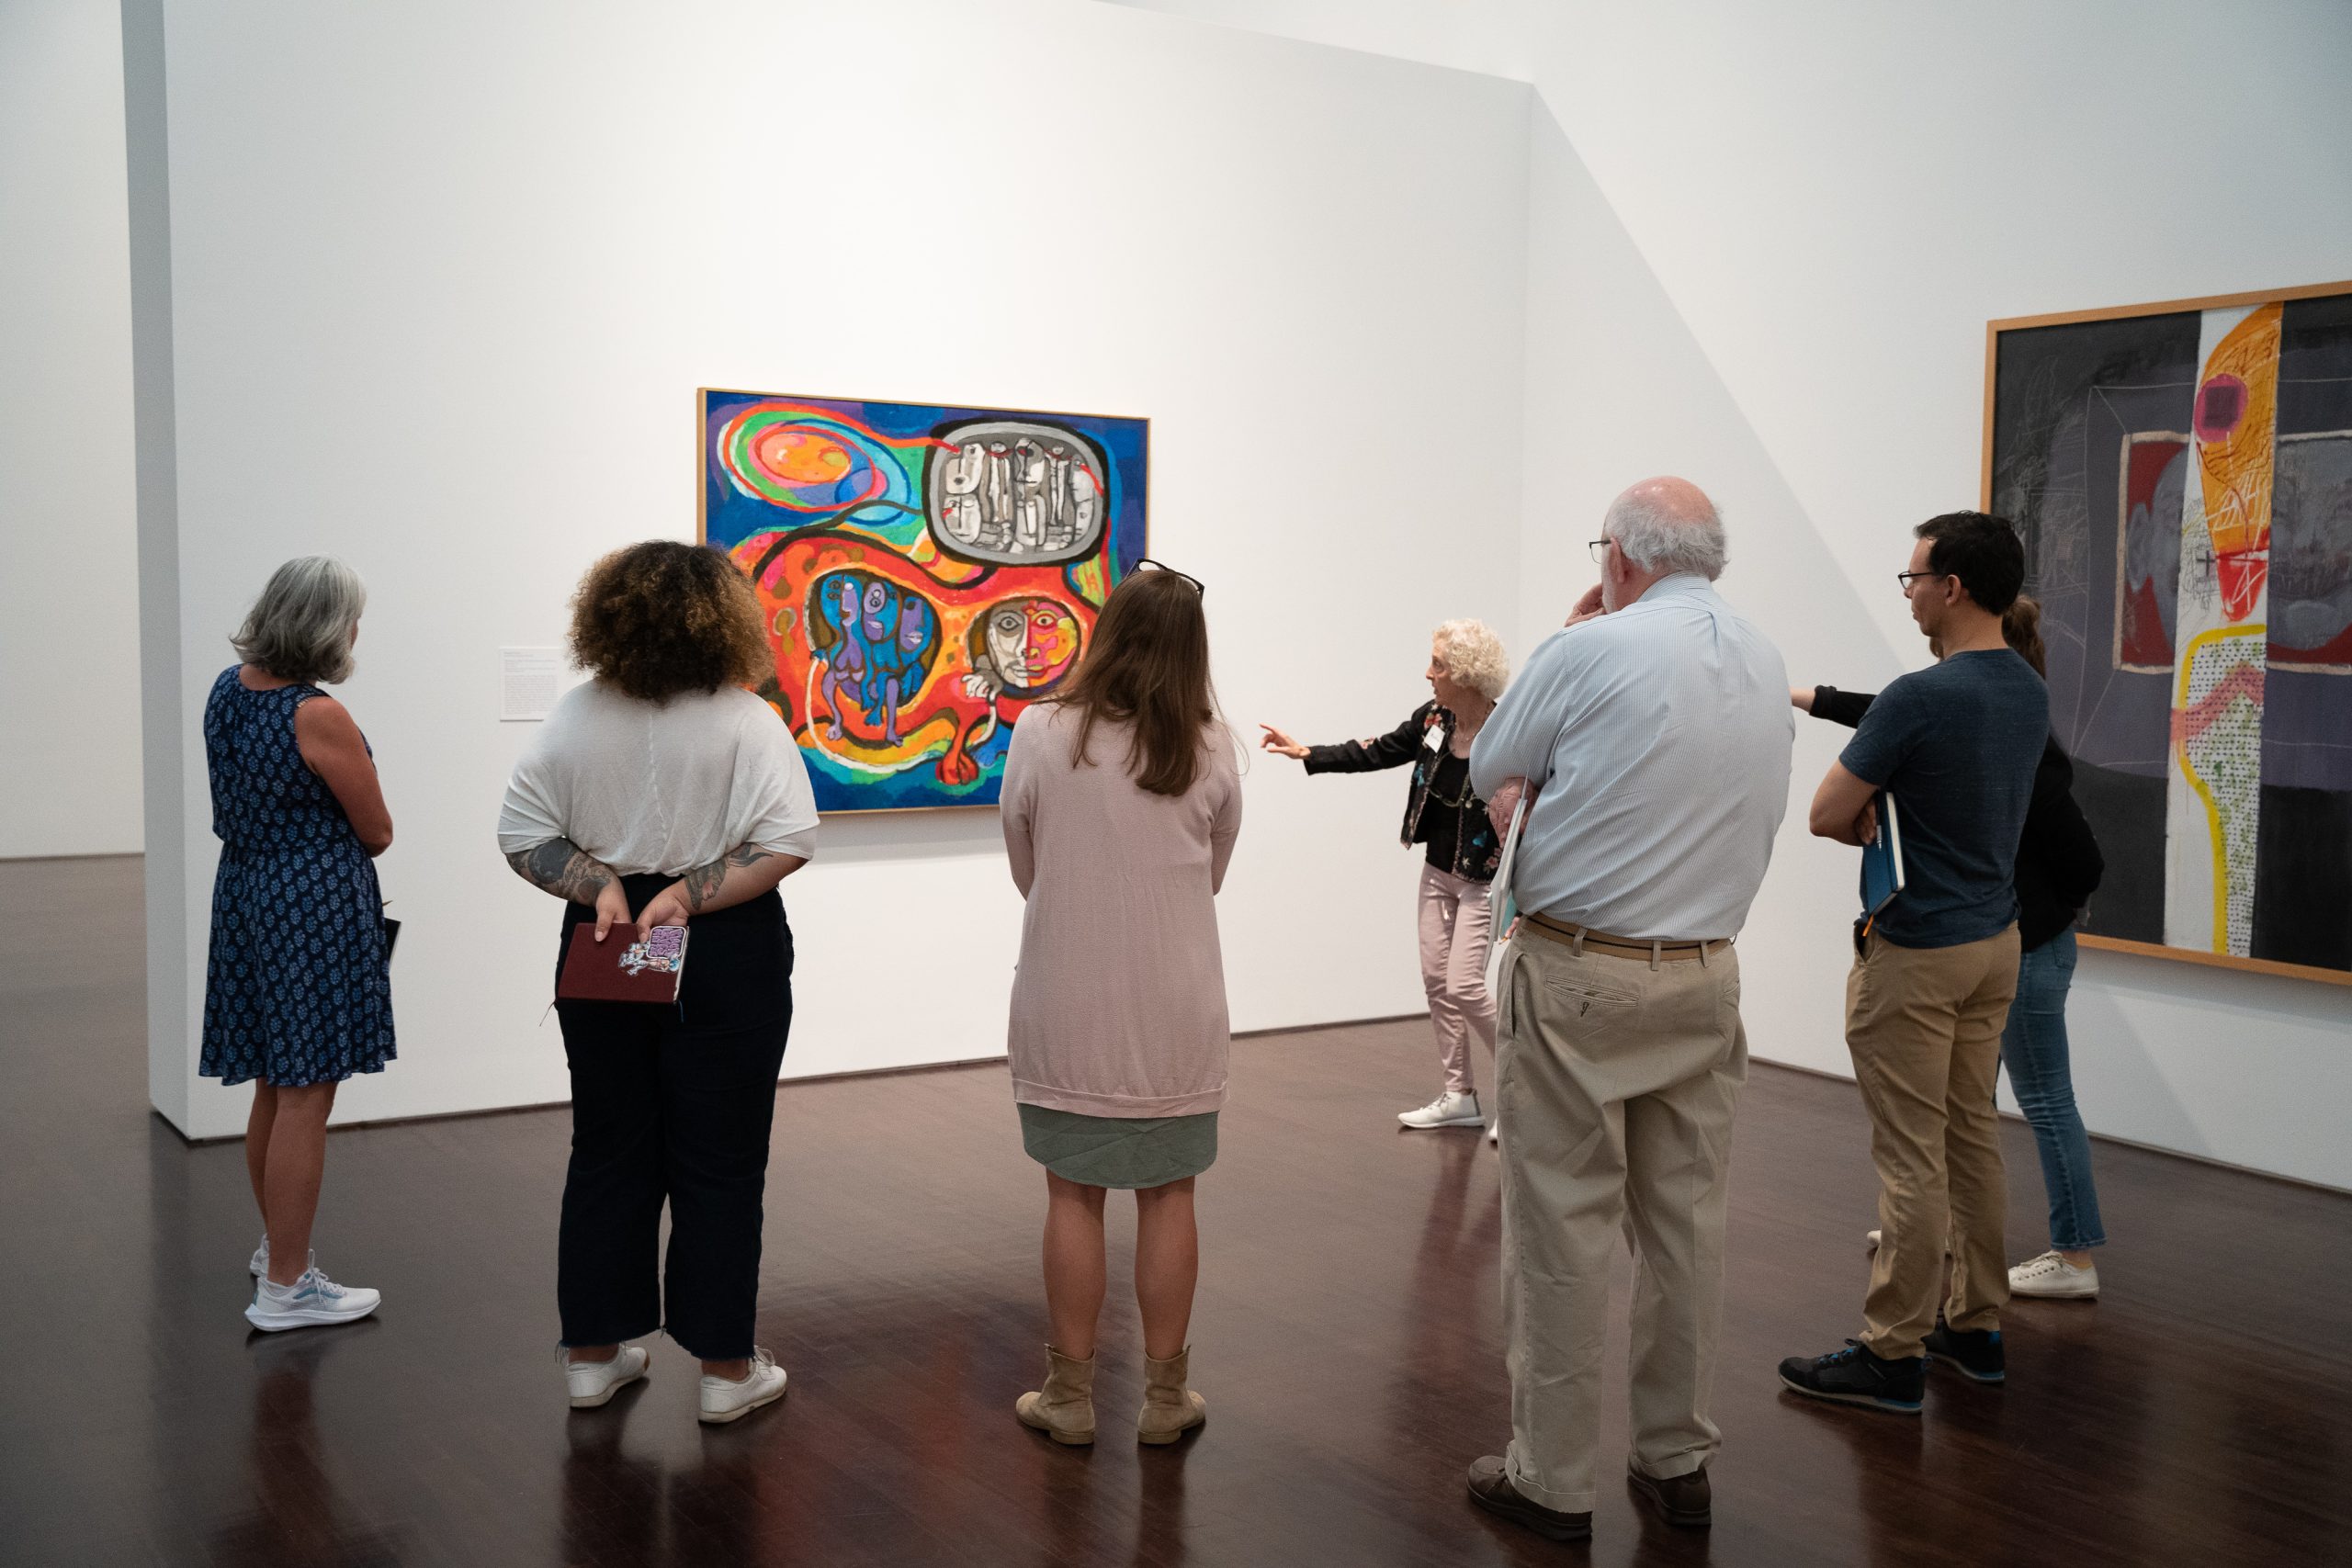 A group of people looking at abstract artwork in a gallery. A teacher gestures to the painting